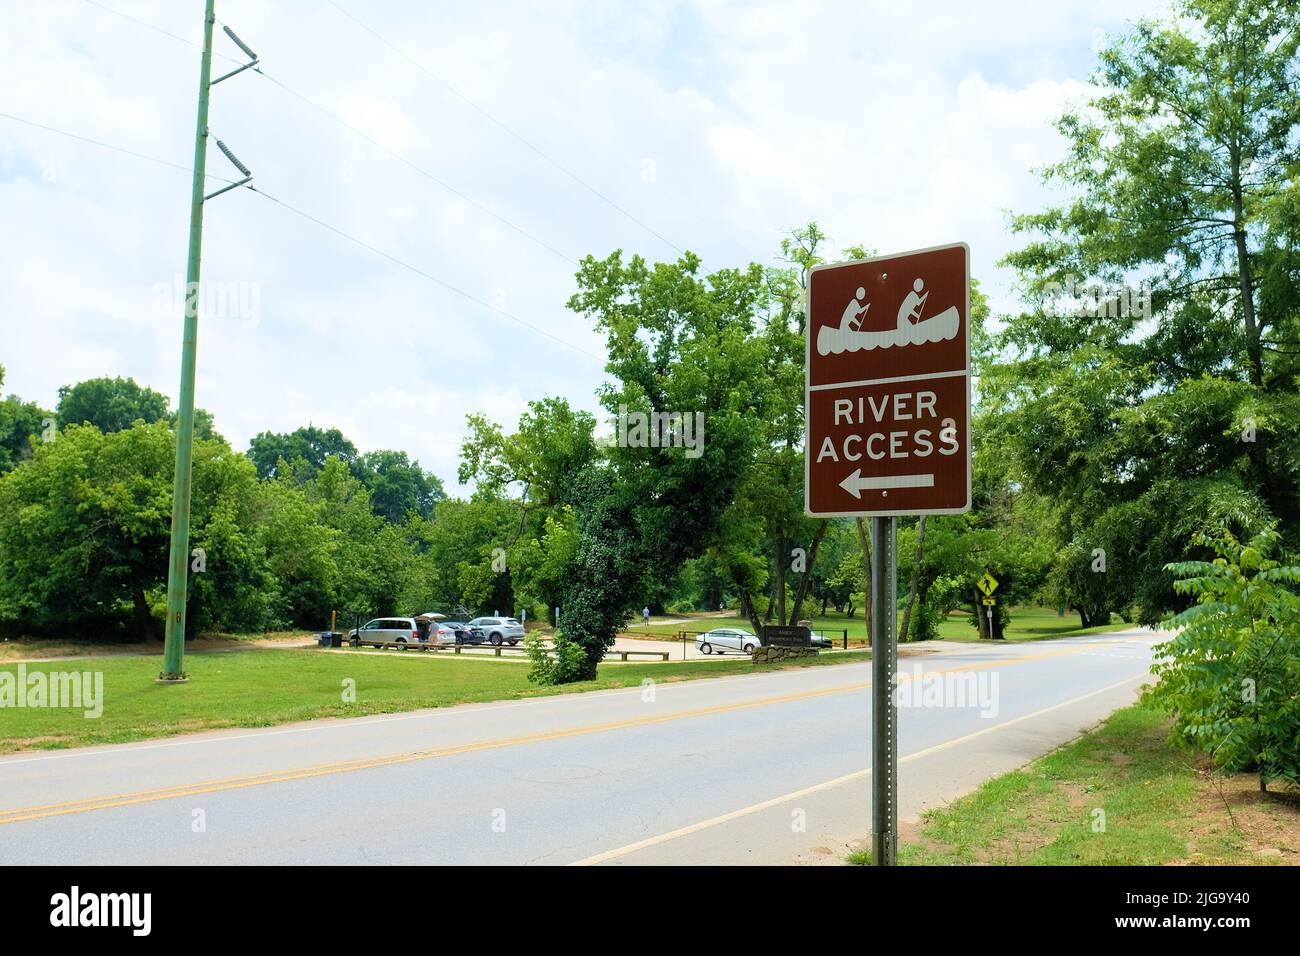 Roadside River Access sign with canoe icon pointing to a French Broad River recreational area; Amboy Riverfront Park; Asheville, North Carolina Stock Photo